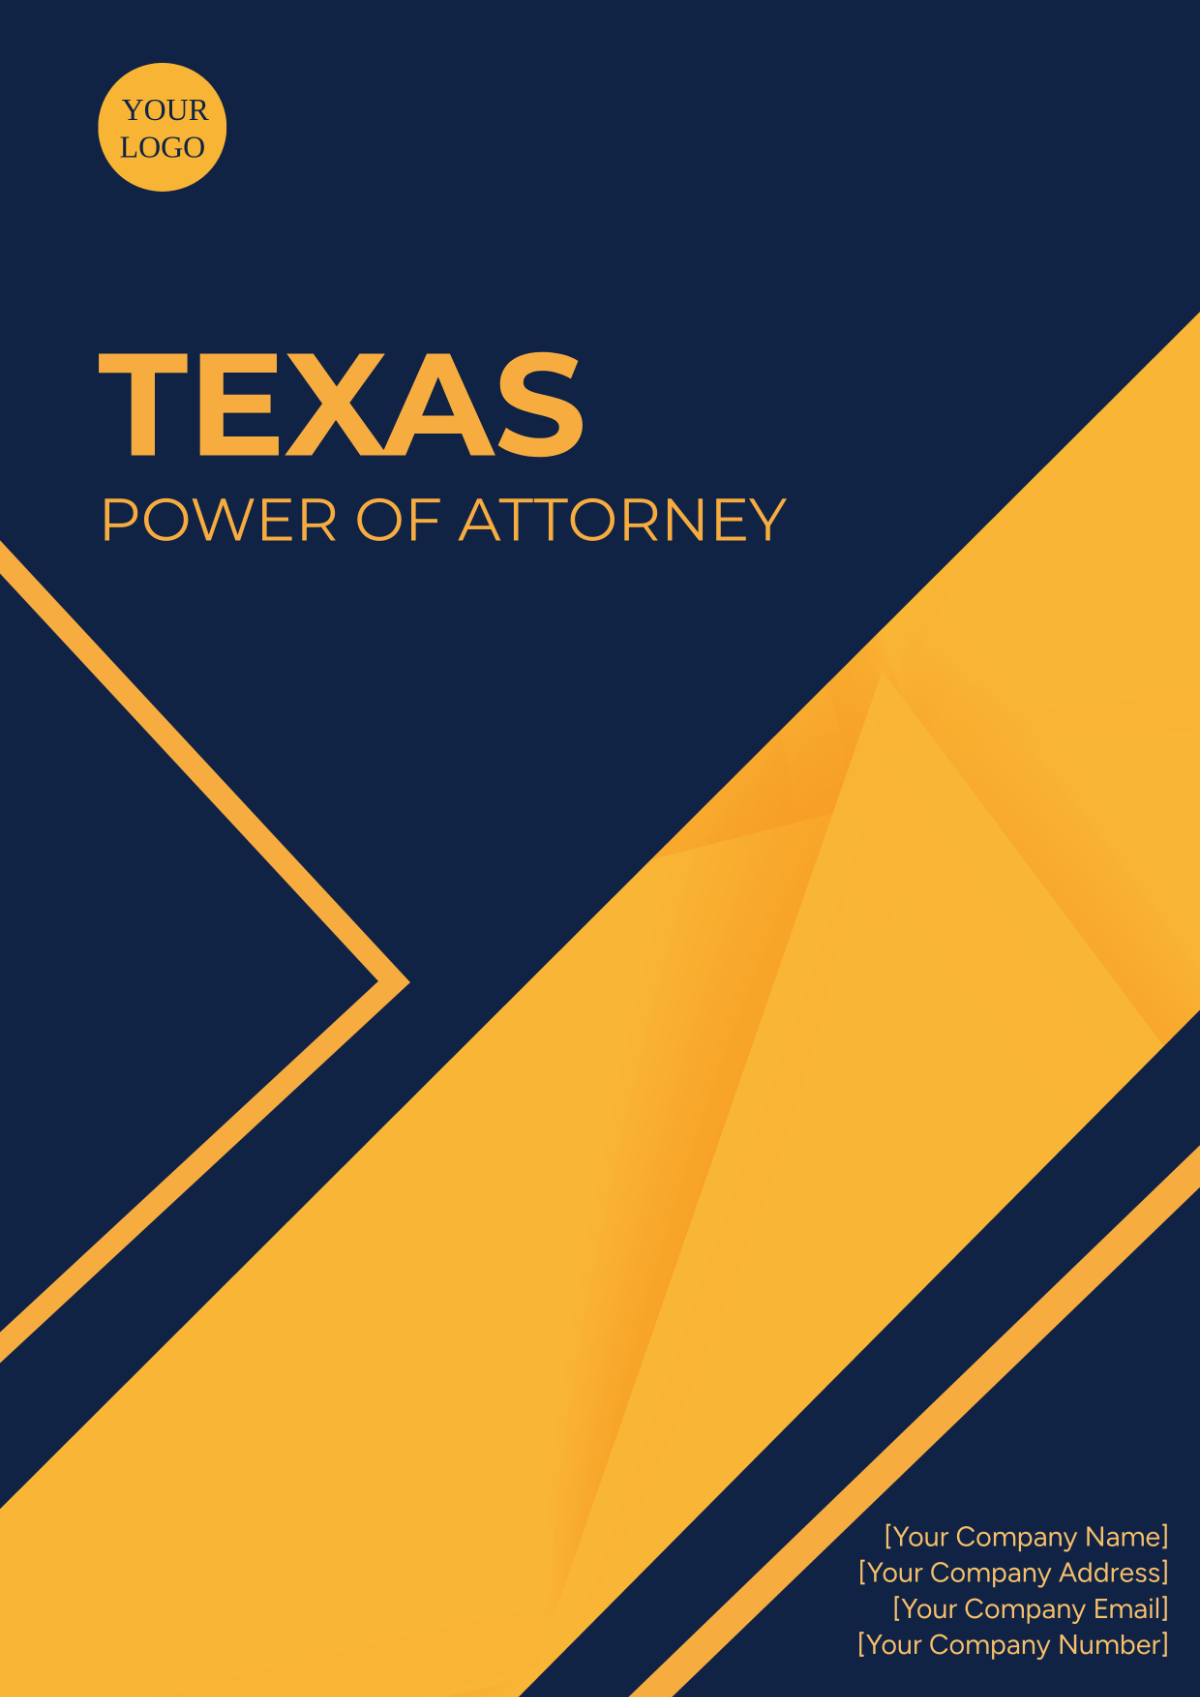 Texas Power of Attorney Cover Page